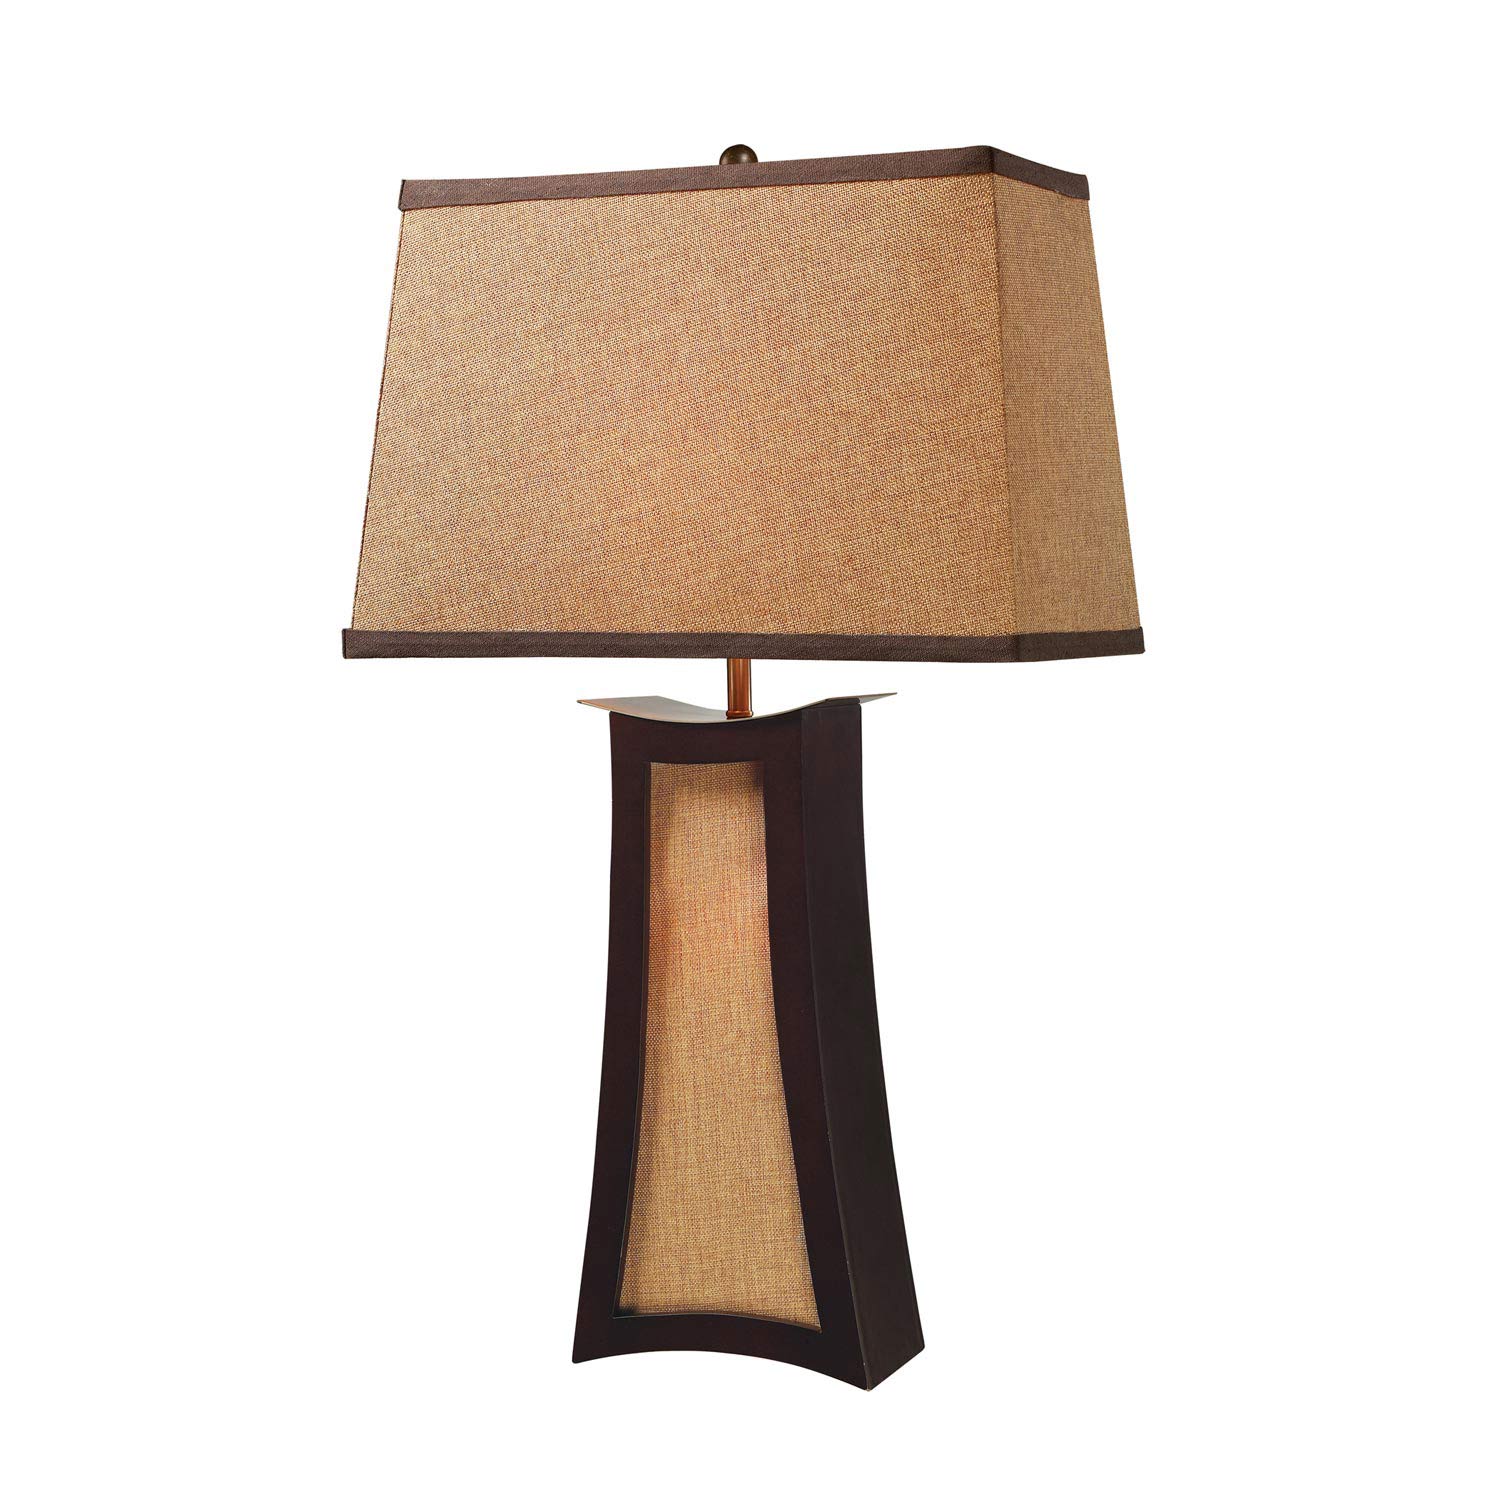 Elk Lighting D1834 Convergence Table Lamp - Wood and Natural Linen